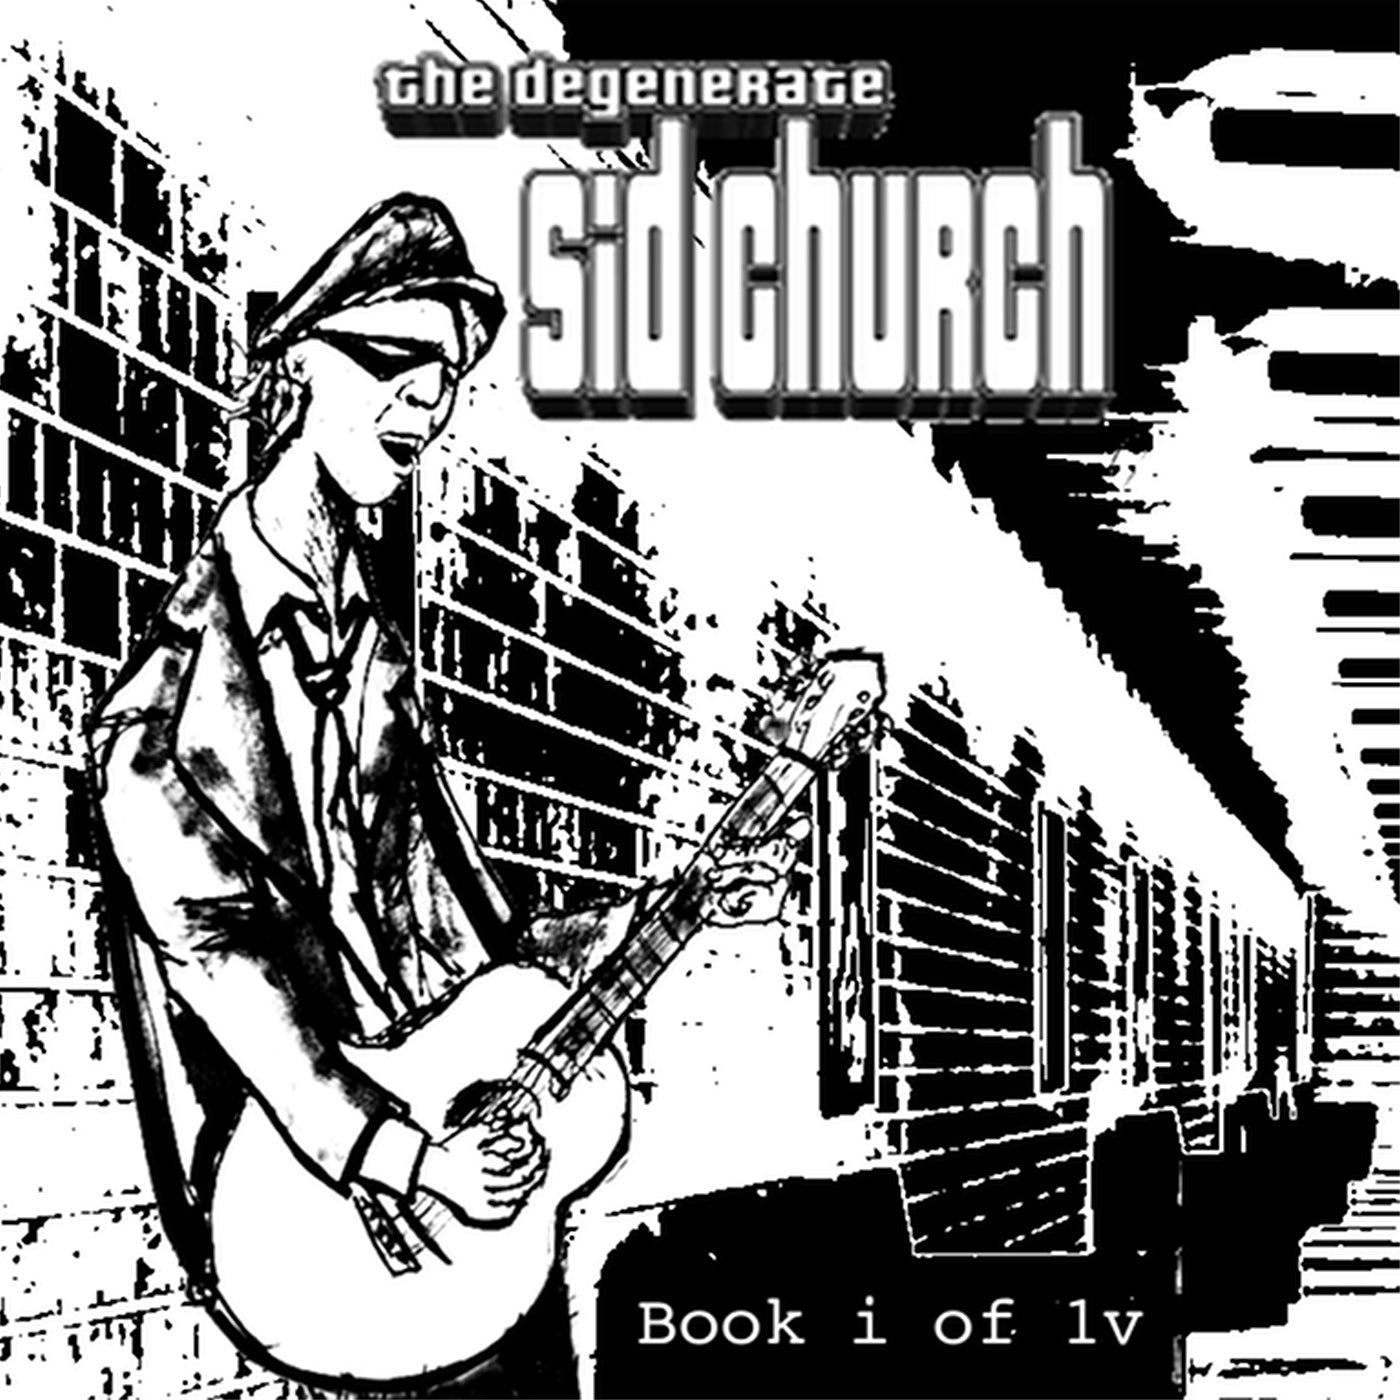 A comic/ concept album about making art in a world run by major corporations. Download the music at iamsidchurch.bandcamp.com 12 pg.